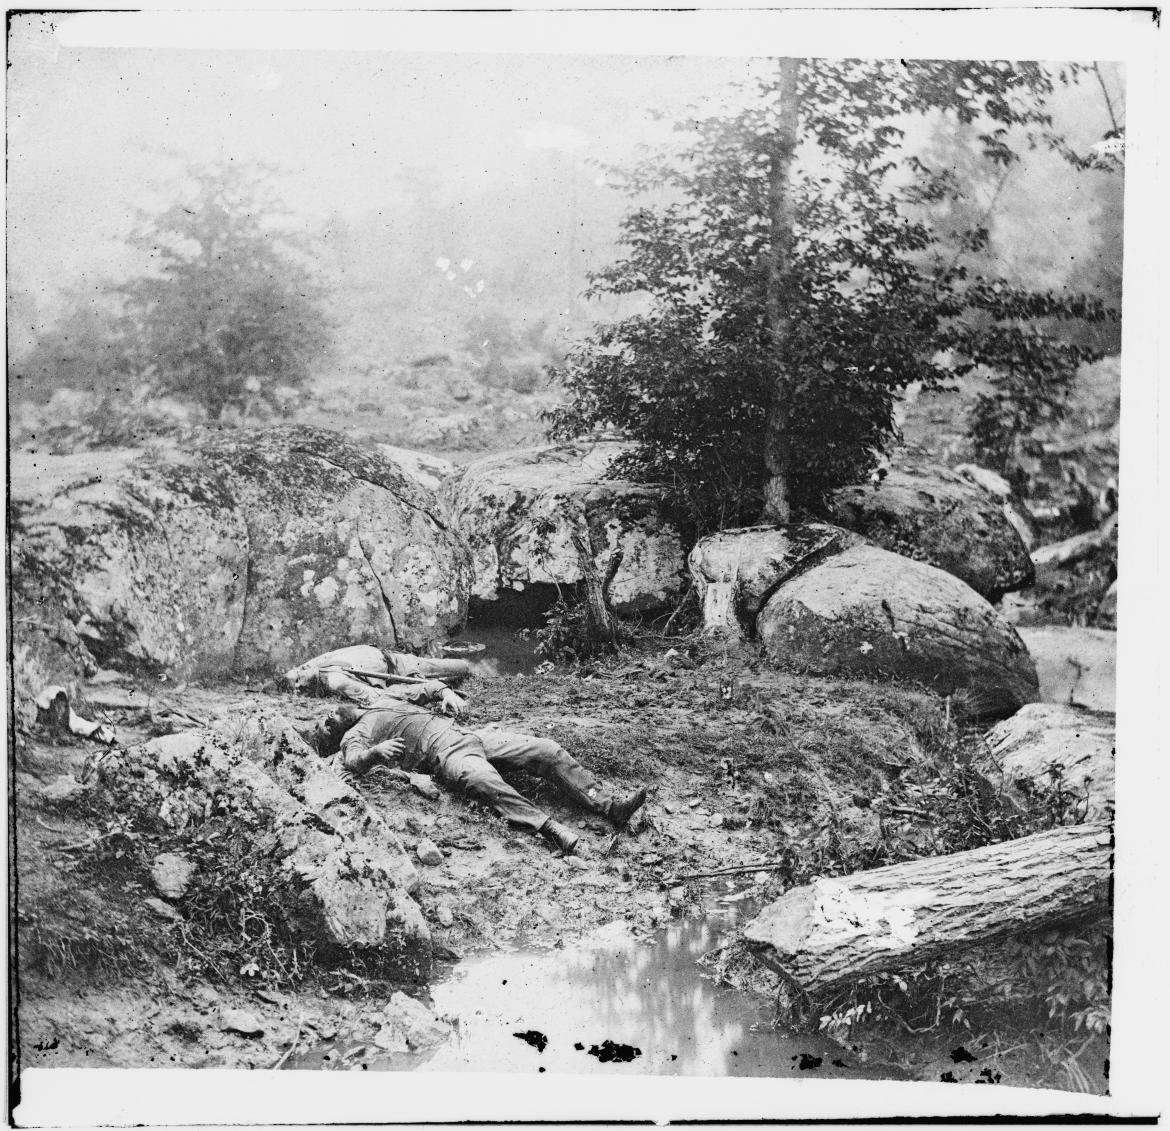 'Dead Confederate soldiers in the ‘slaughter pen’ at the foot of Little Round Top'